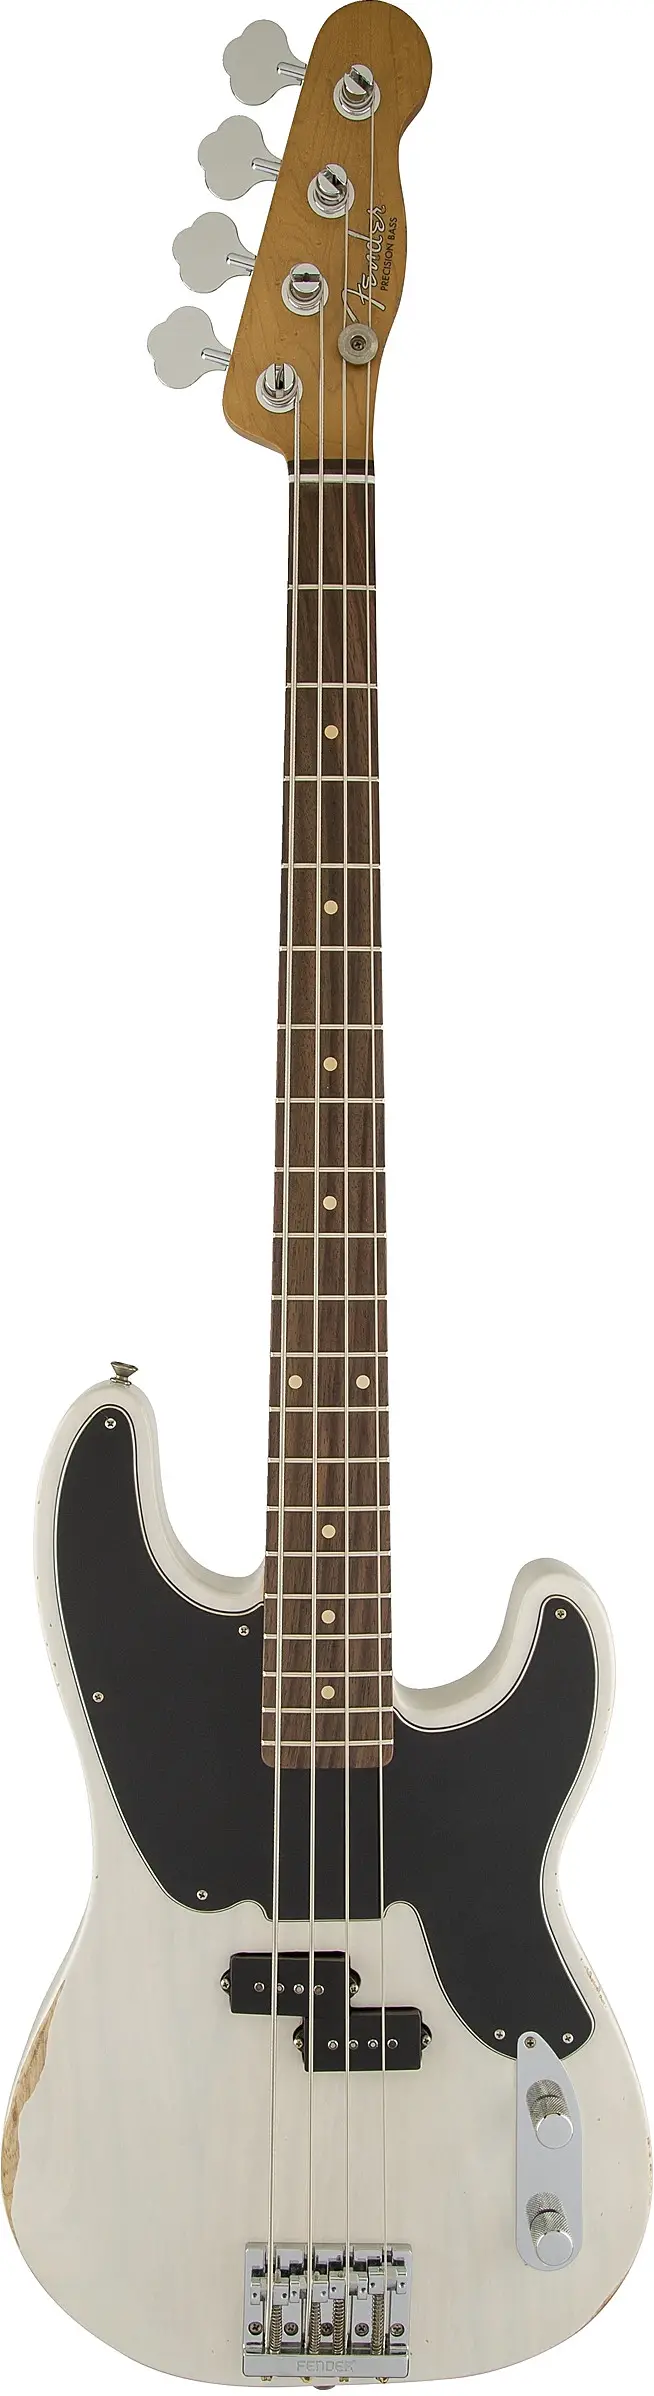 Mike Dirnt Road Worn Precision Bass by Fender